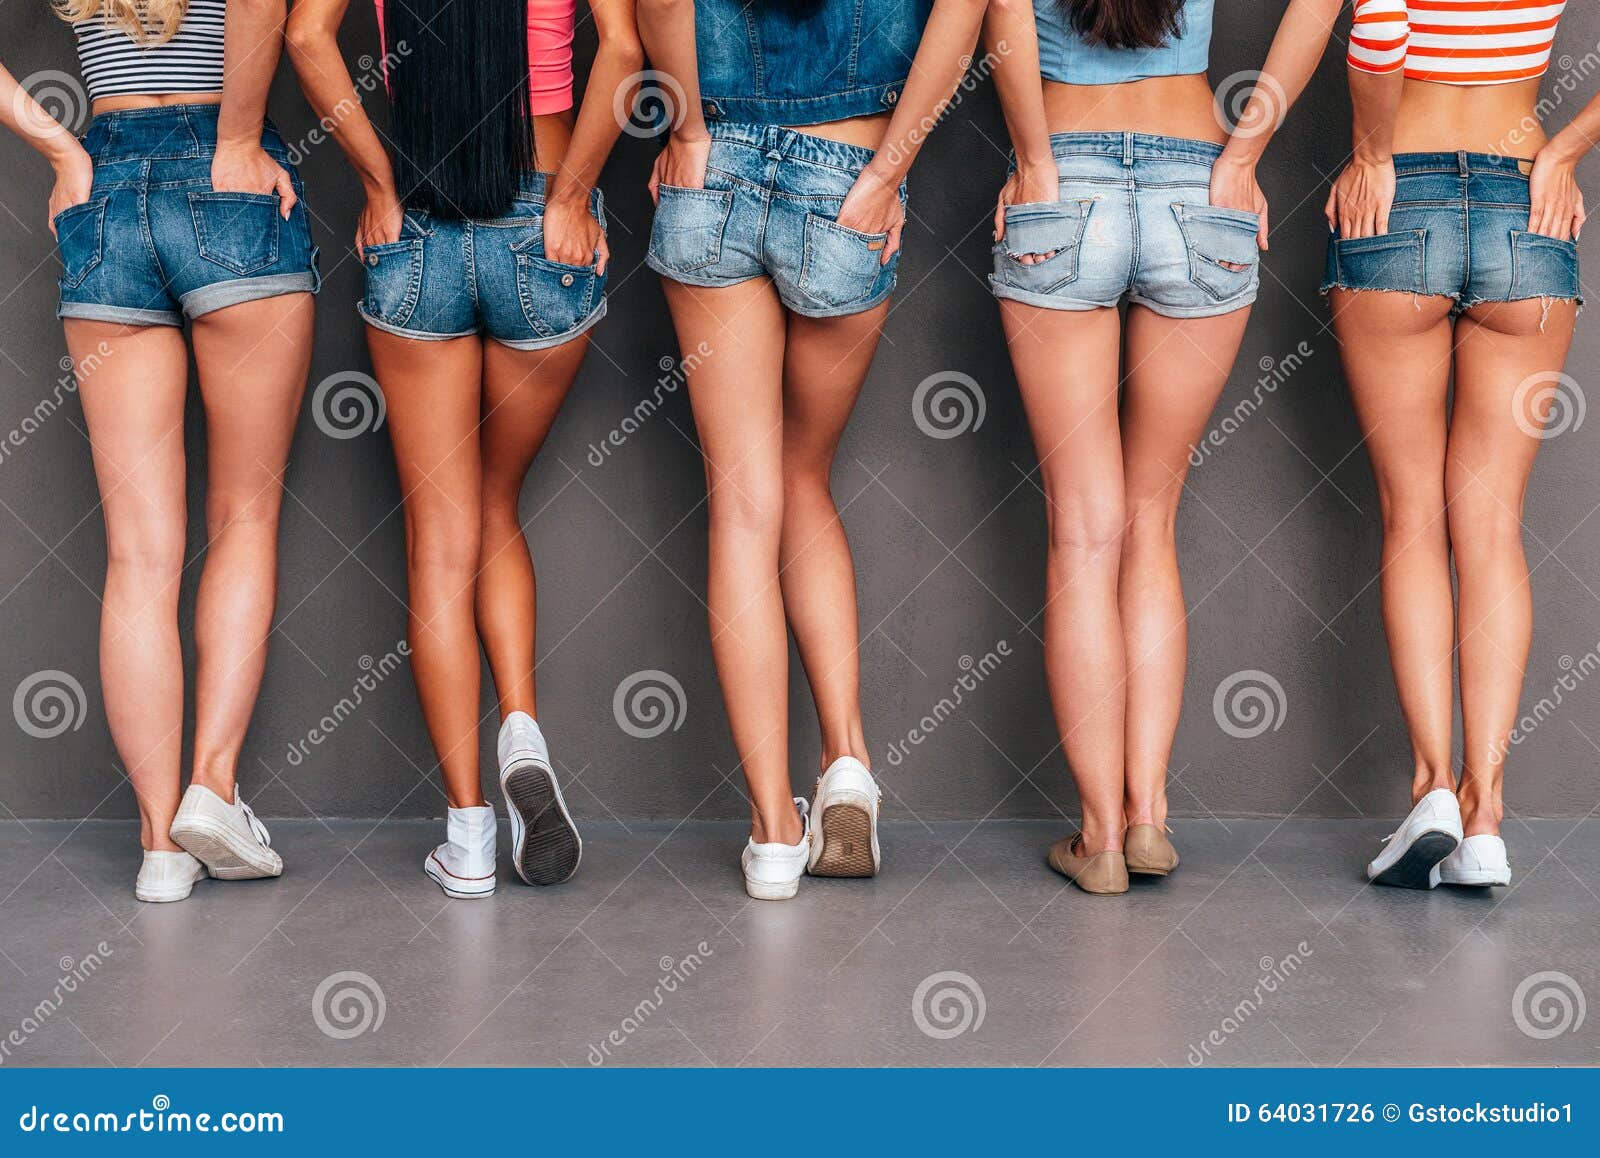 Download Hands in pockets. stock photo. Image of femininity ...